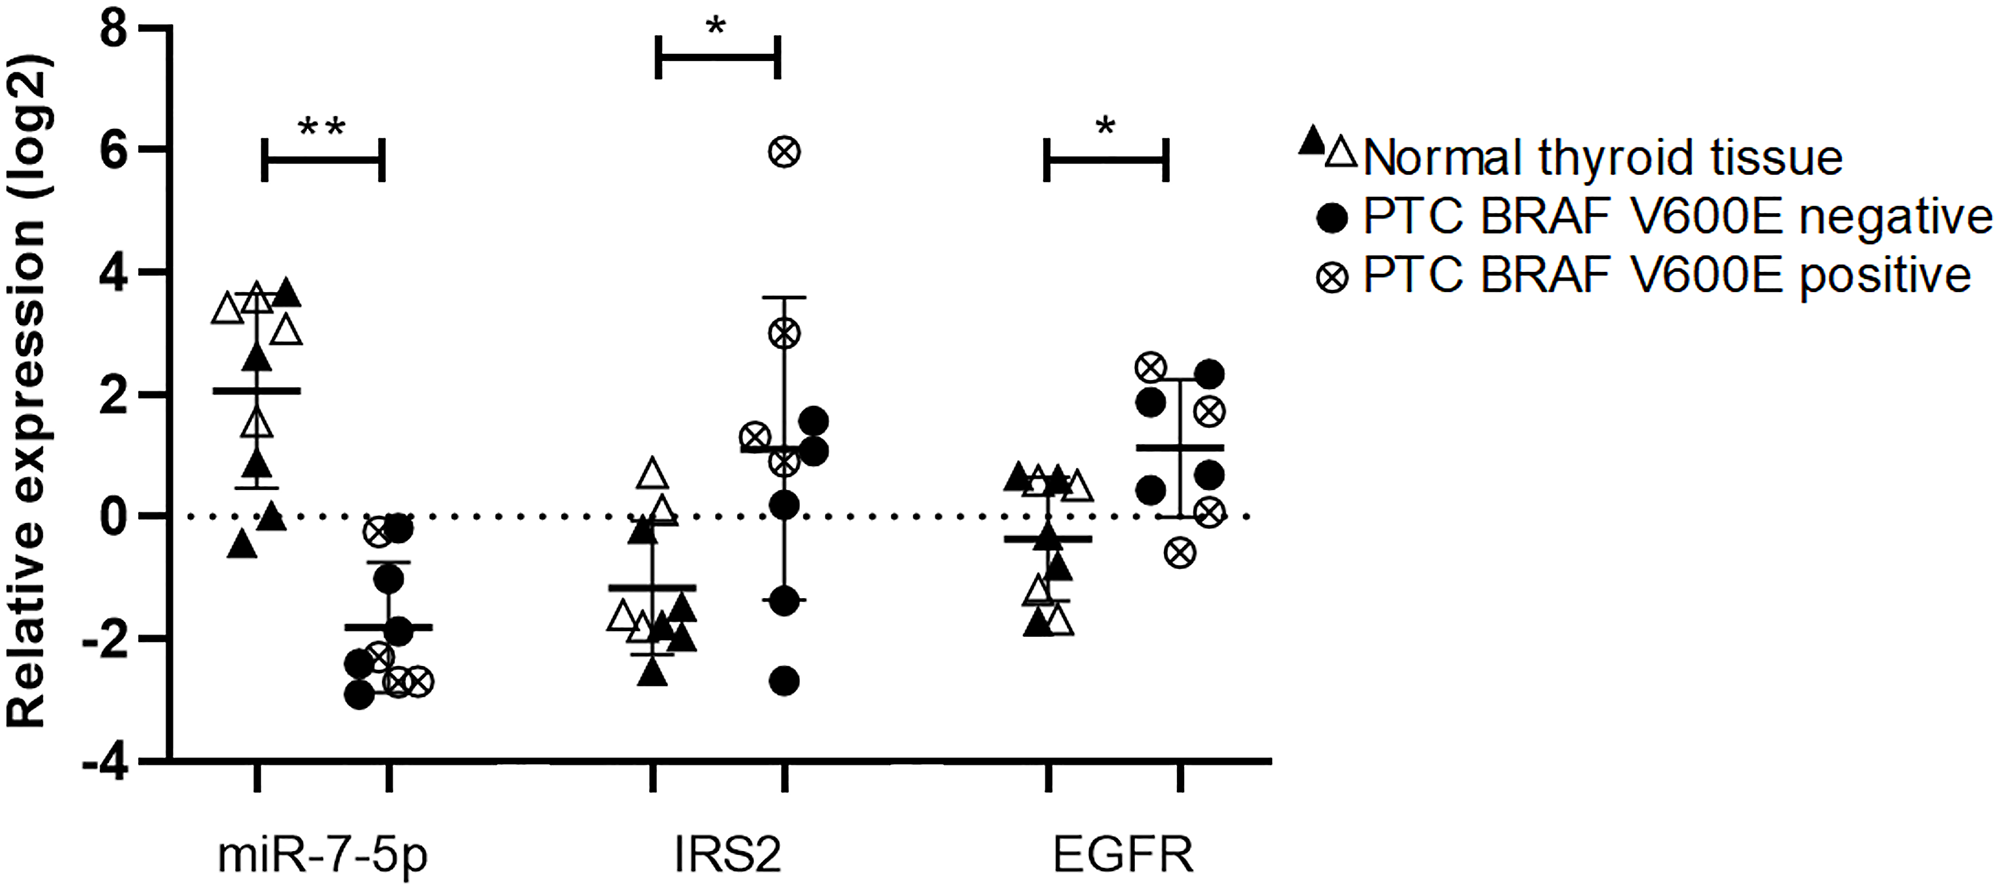 Dereregulation of miR-7-5p, IRS2 and EGFR measured by RT-qPCR.